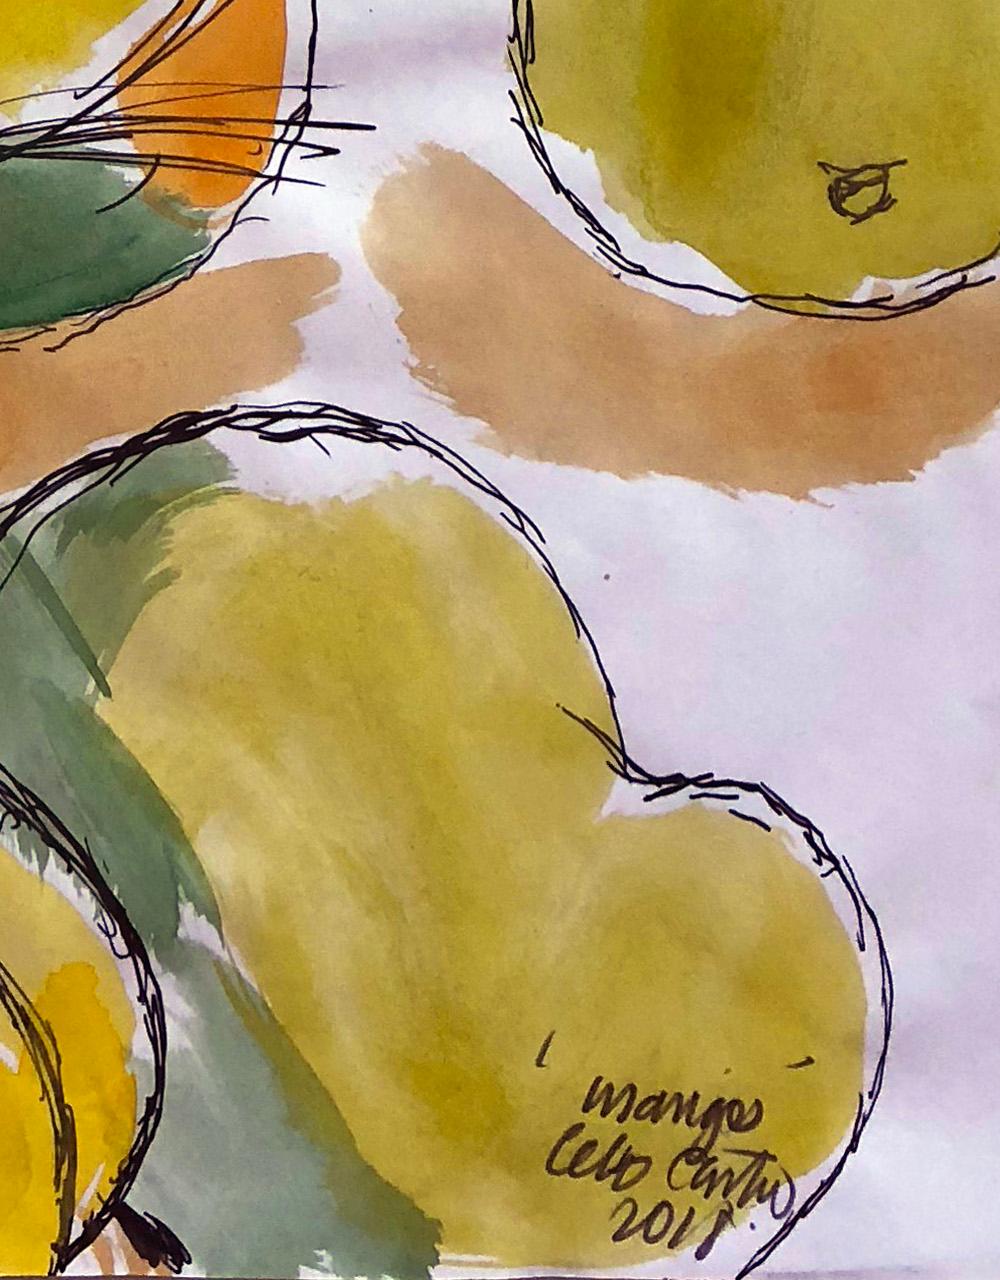 Colombian Mangos, Watercolor and Ink on Archival Paper, 2018